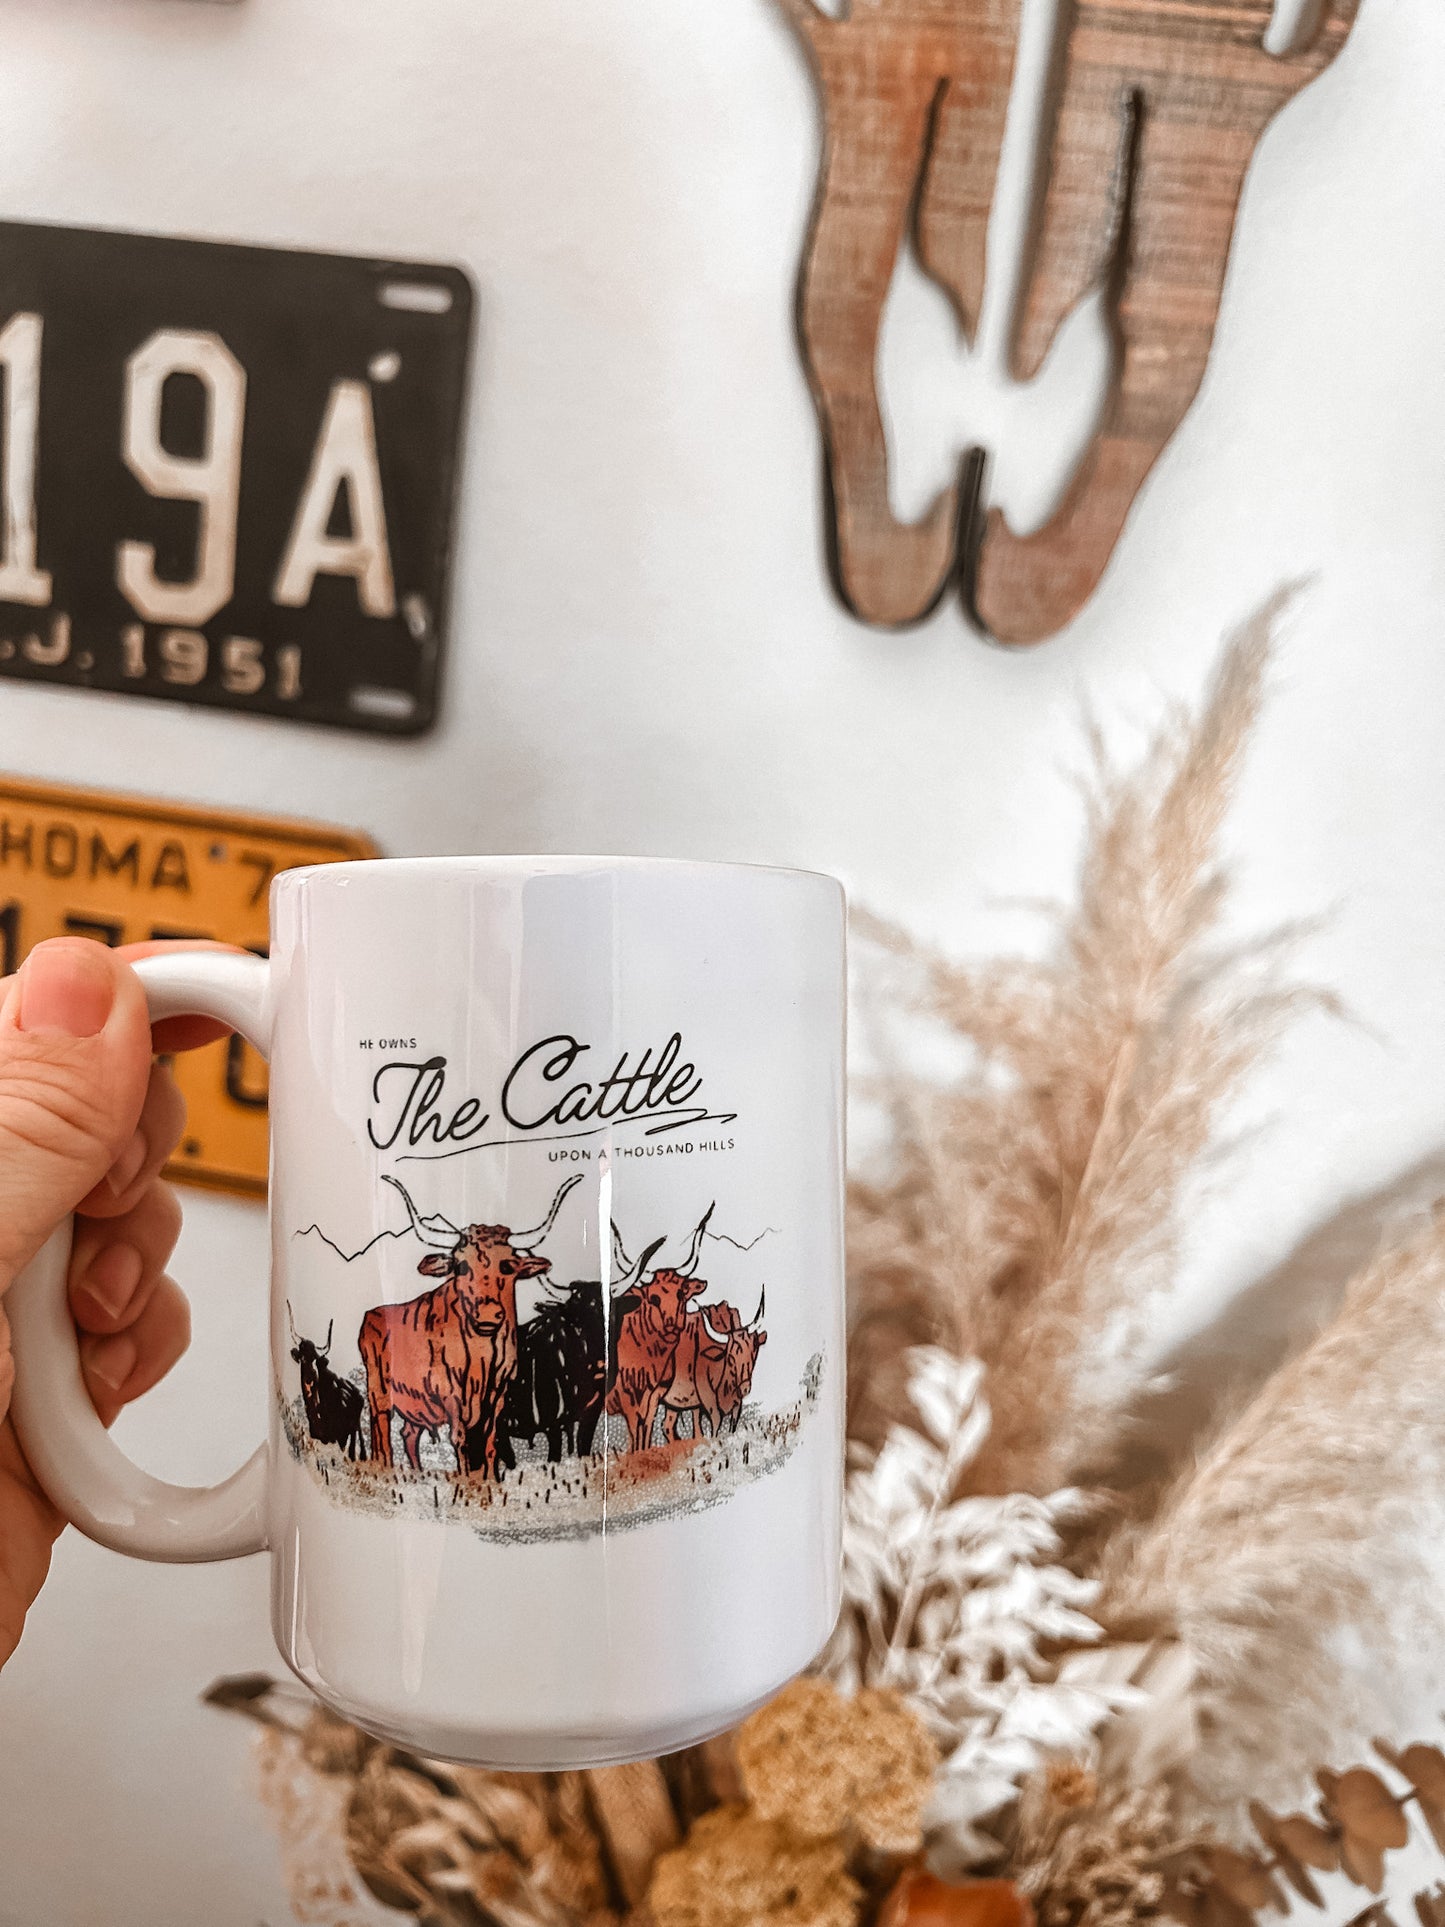 He Owns the Cattle Upon a Thousand Hills Mug